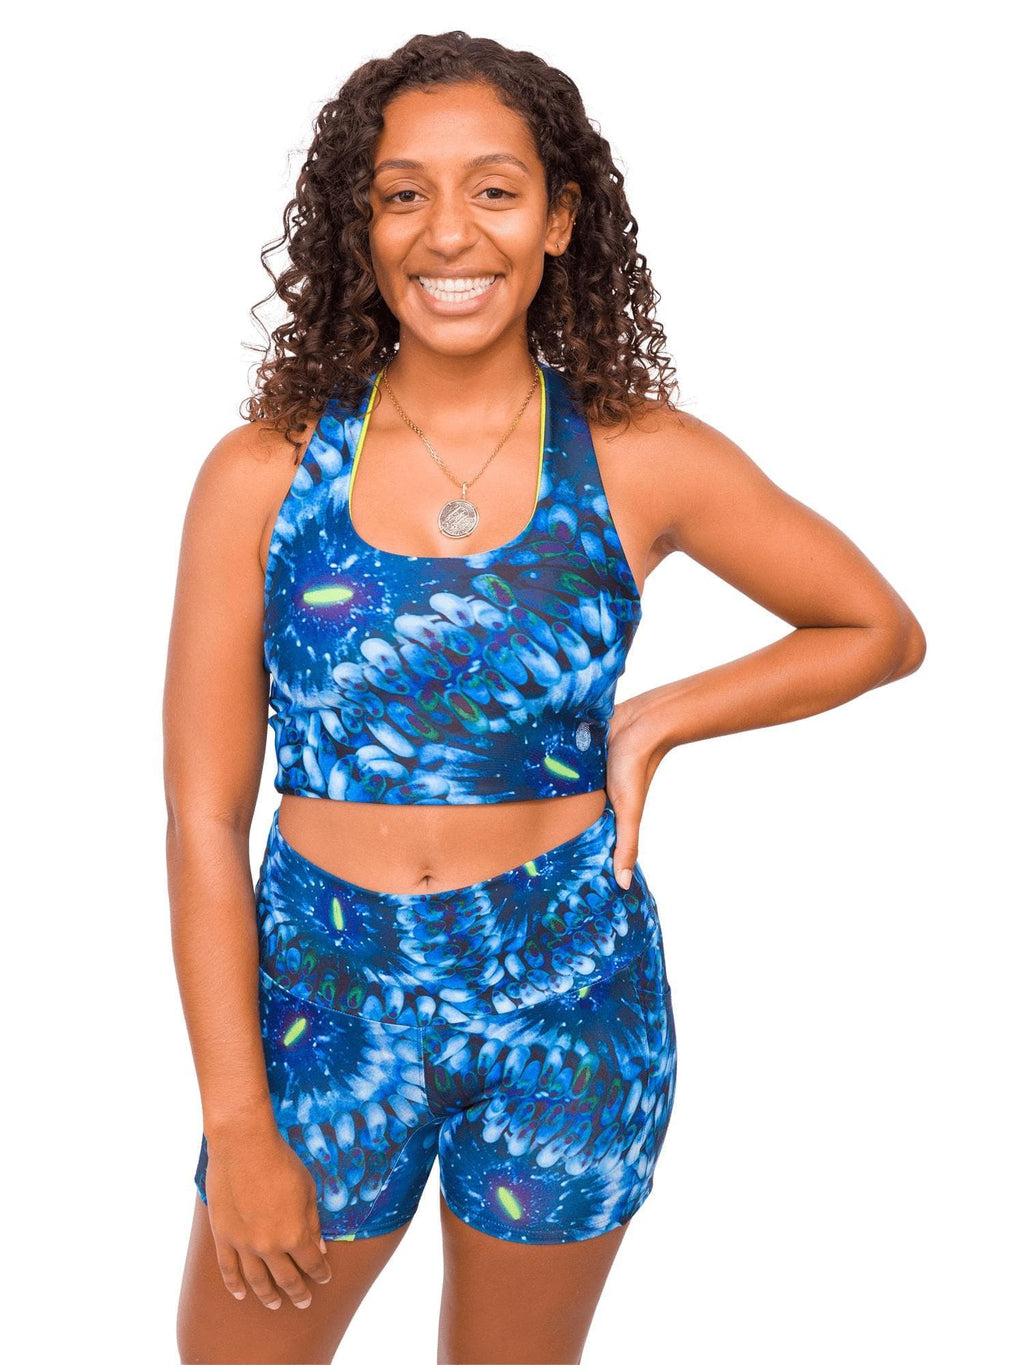 Model: Gabrielle works in coral reef restoration and strives to end single-use plastic in her daily routine. She is 5&#39;4&quot;, 135lbs, 34C and is wearing a M top and M shorts.